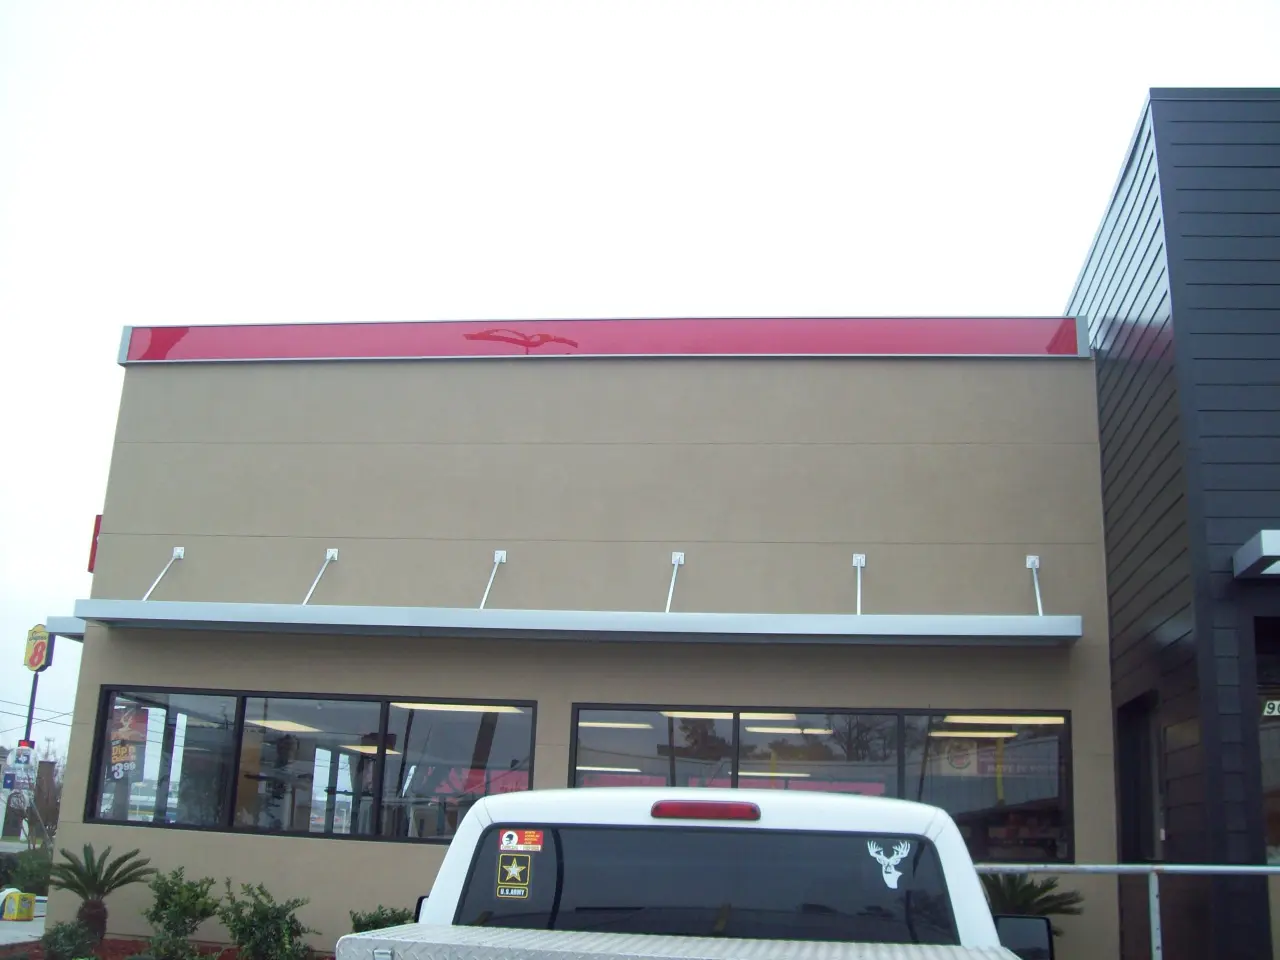 Burger King restaurant side view on the display